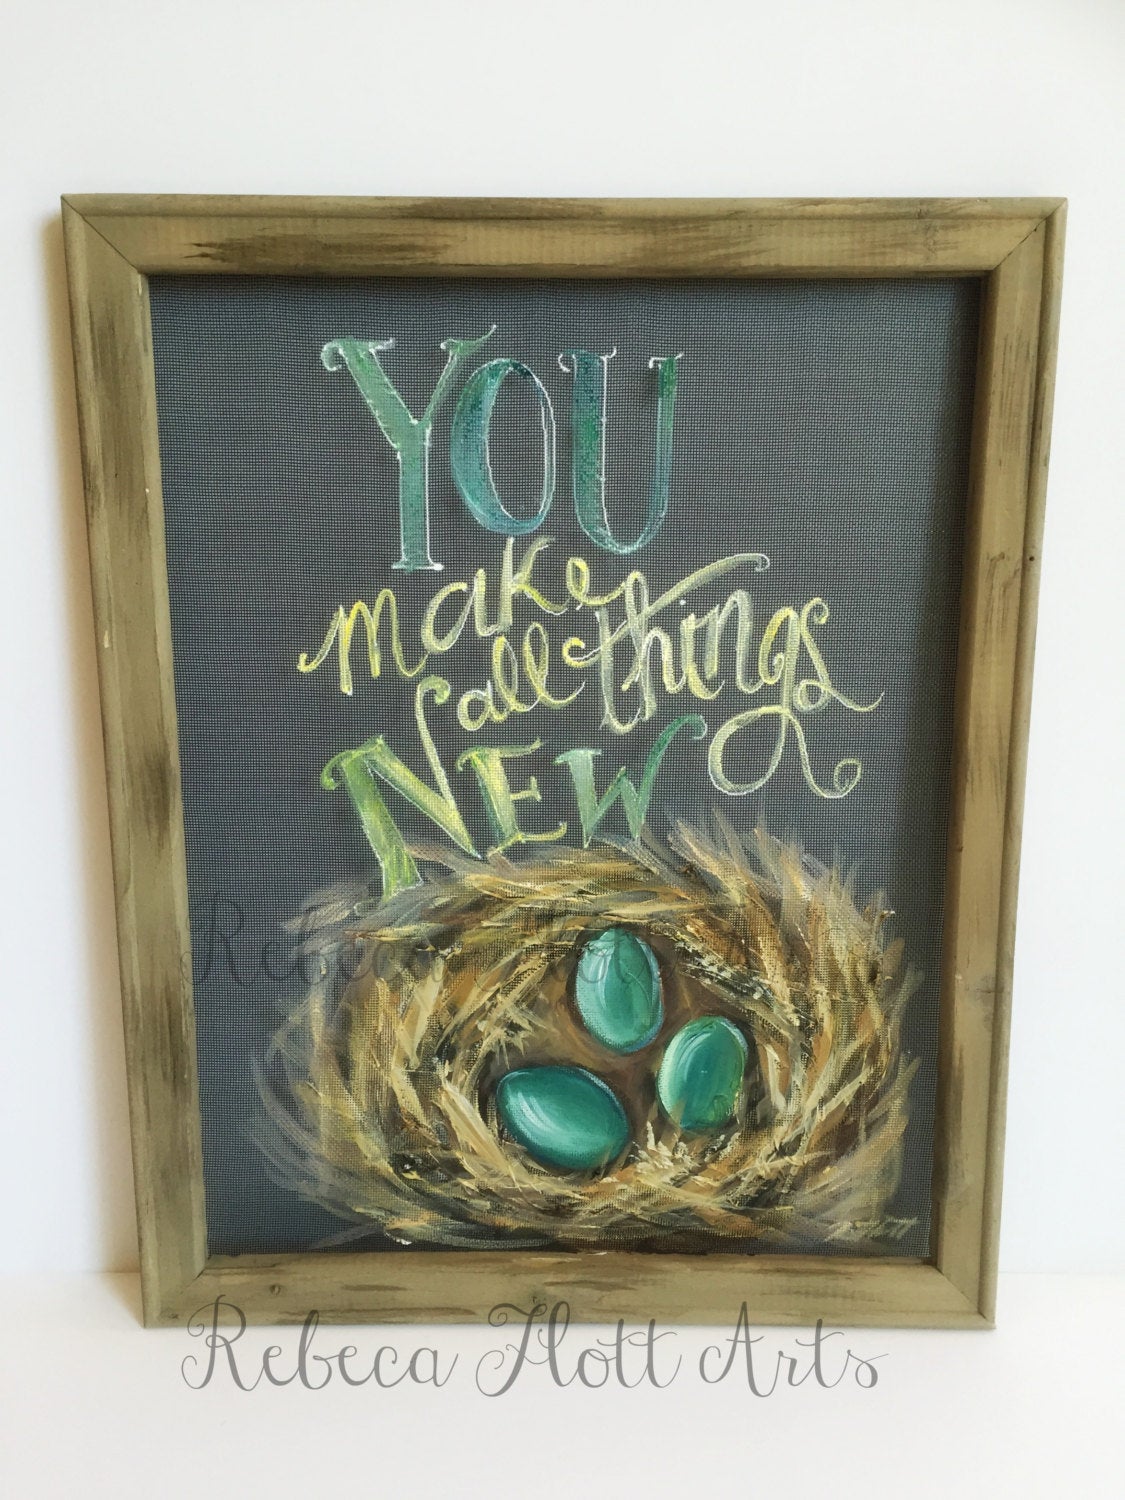 Robin Nest- You make all things New